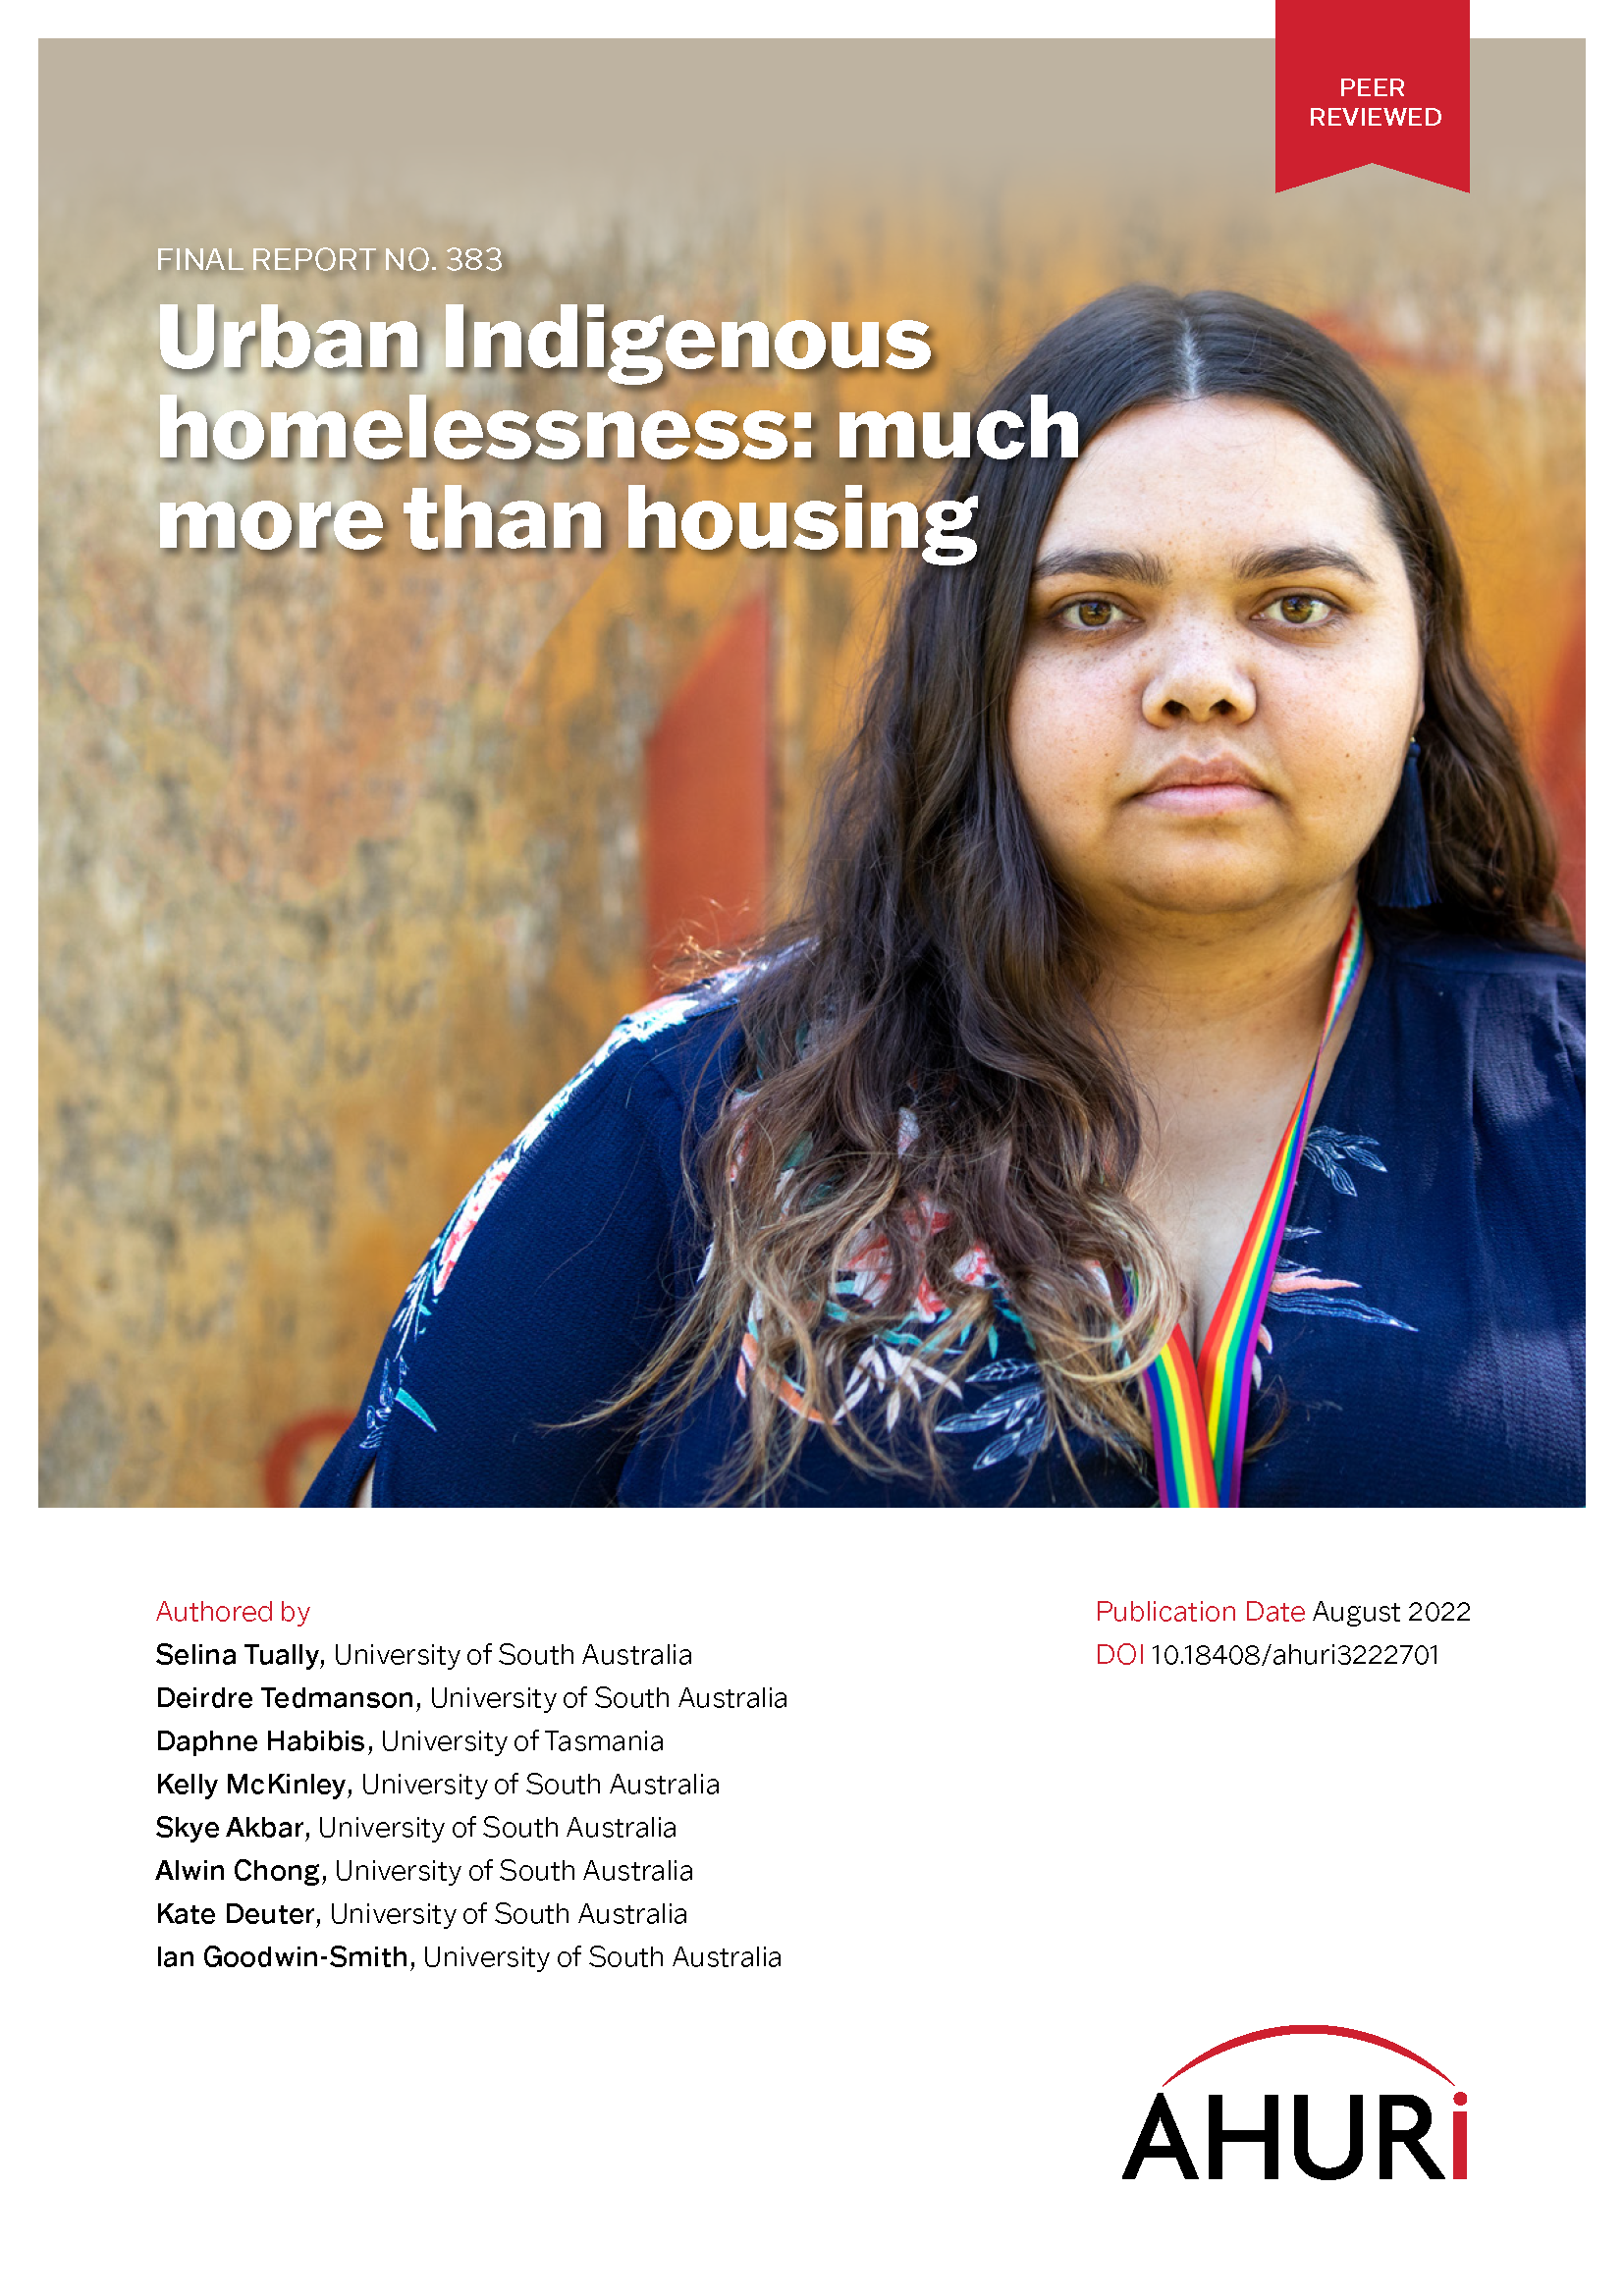 Urban Indigenous homelessness: much more than housing